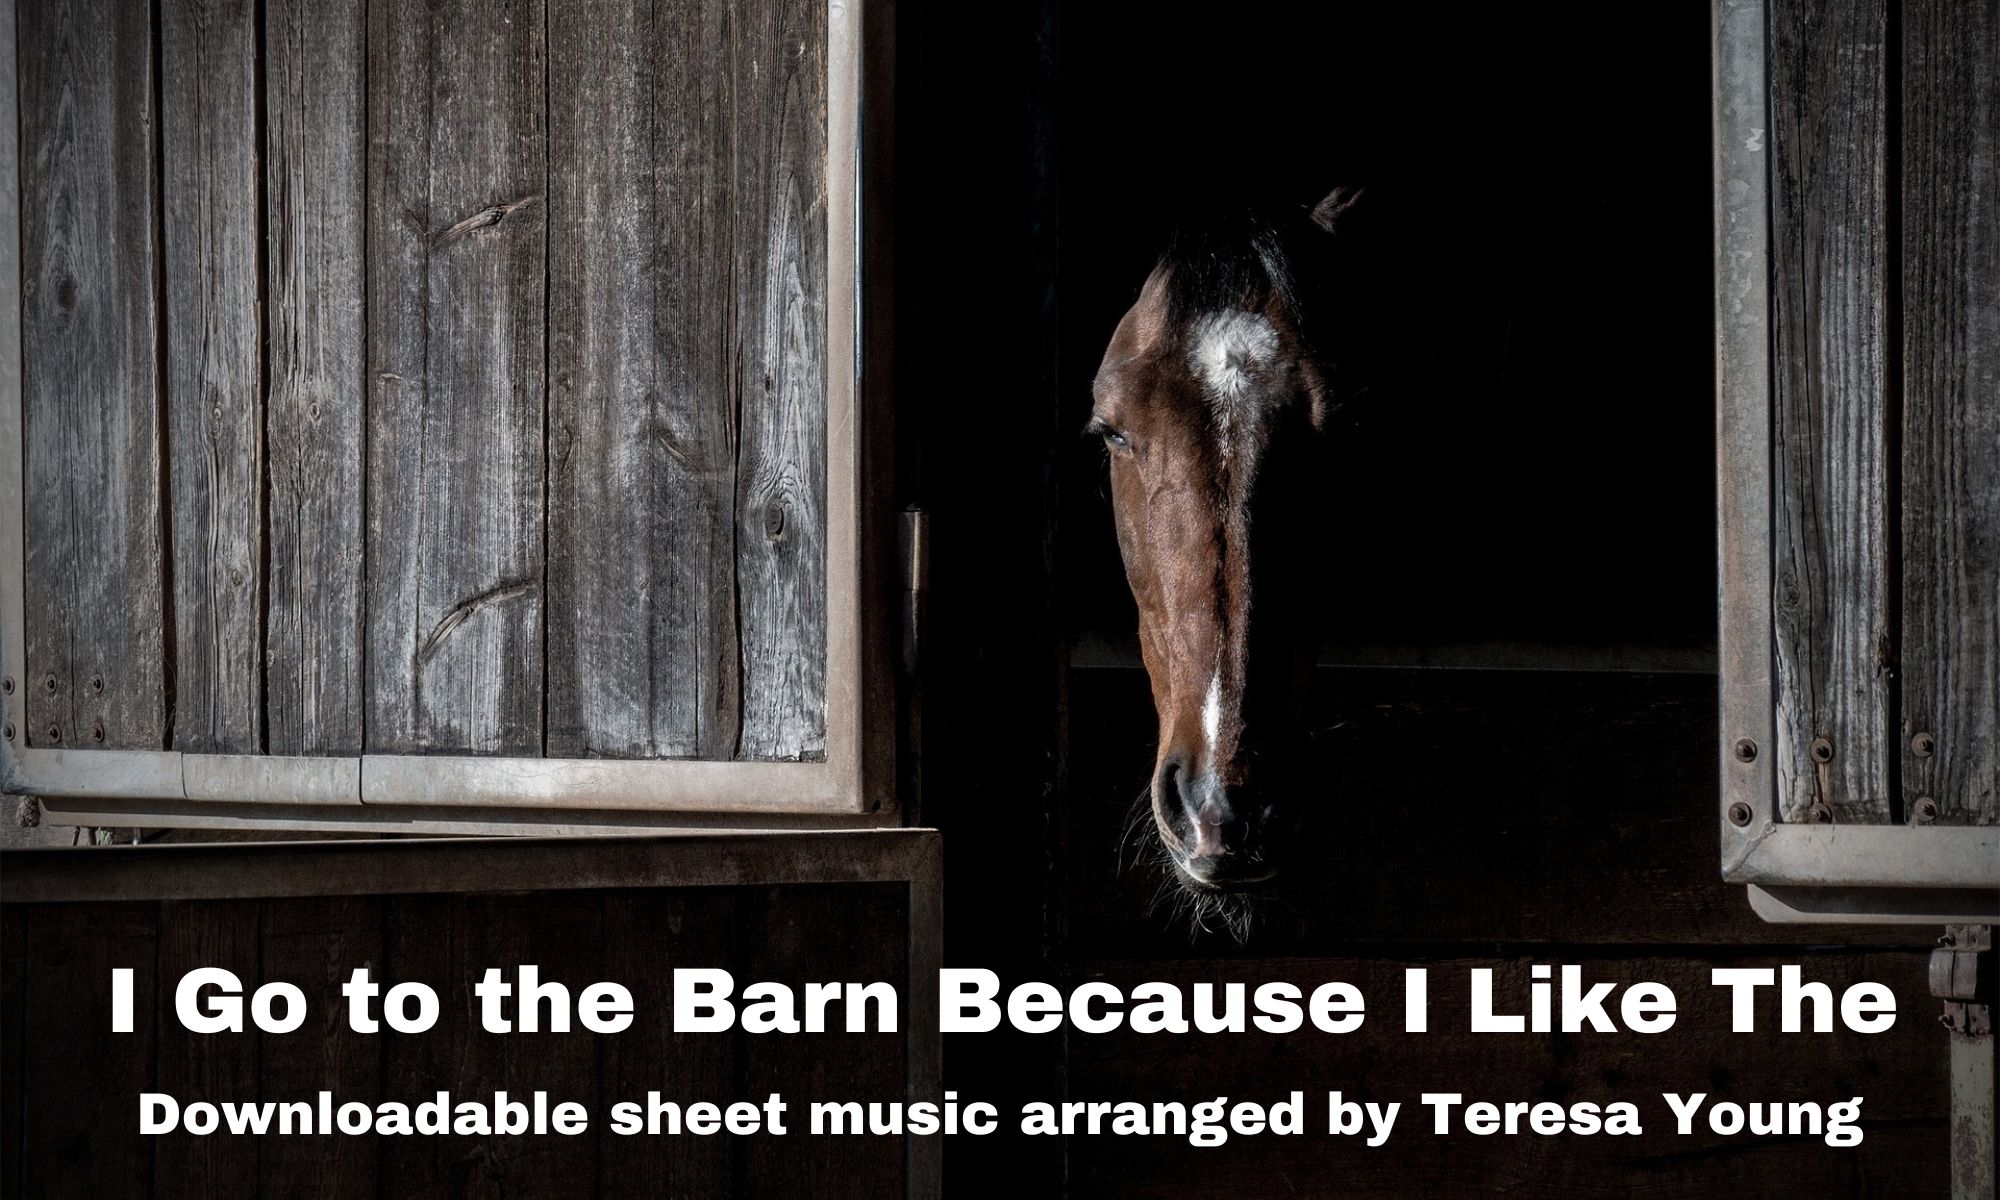 I Go to the Barn Because I Like The, arr. by Teresa Young